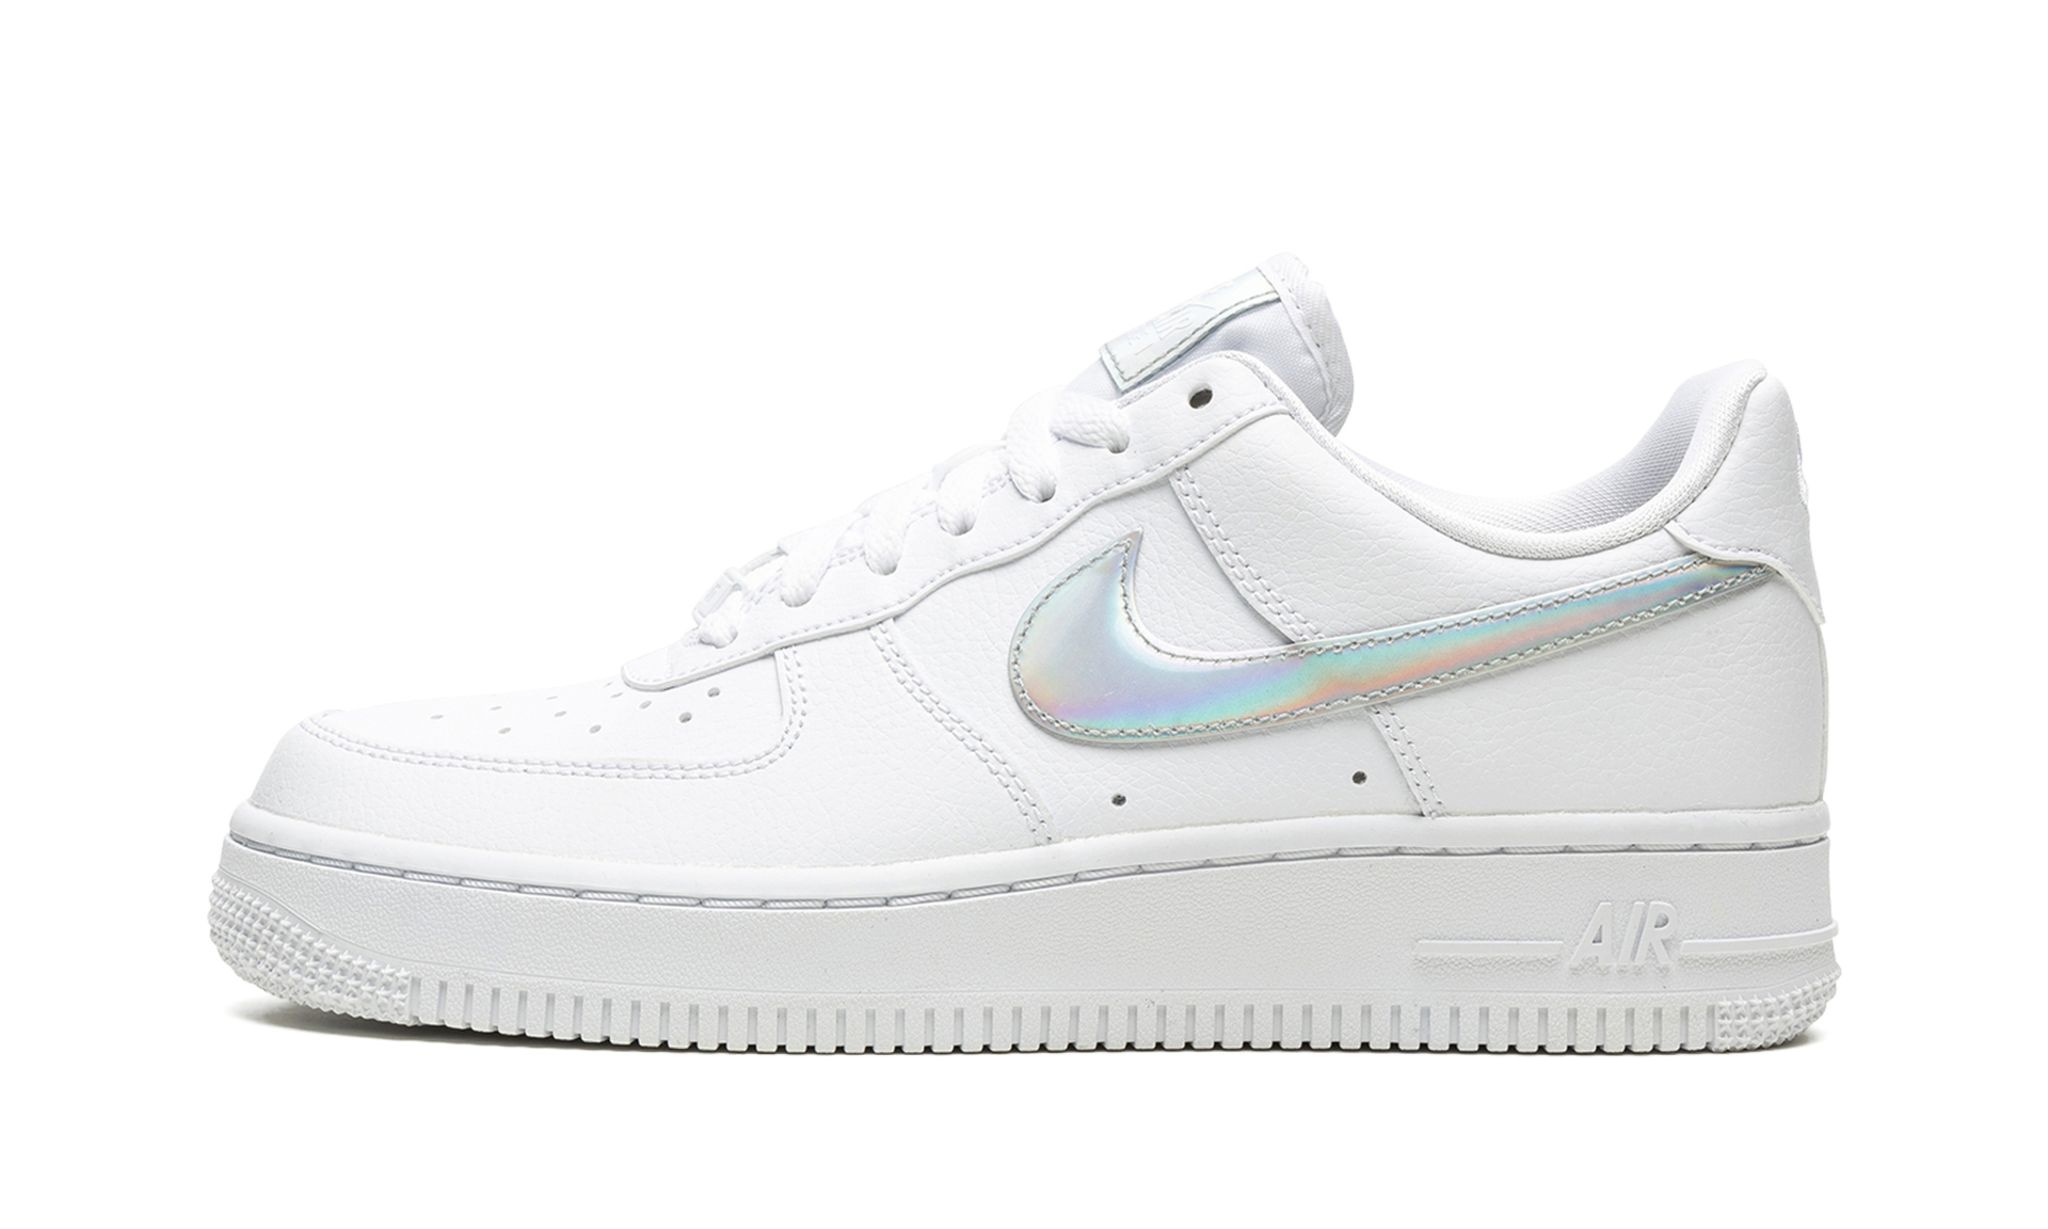 Air Force 1 Low "Iridescent" - 1